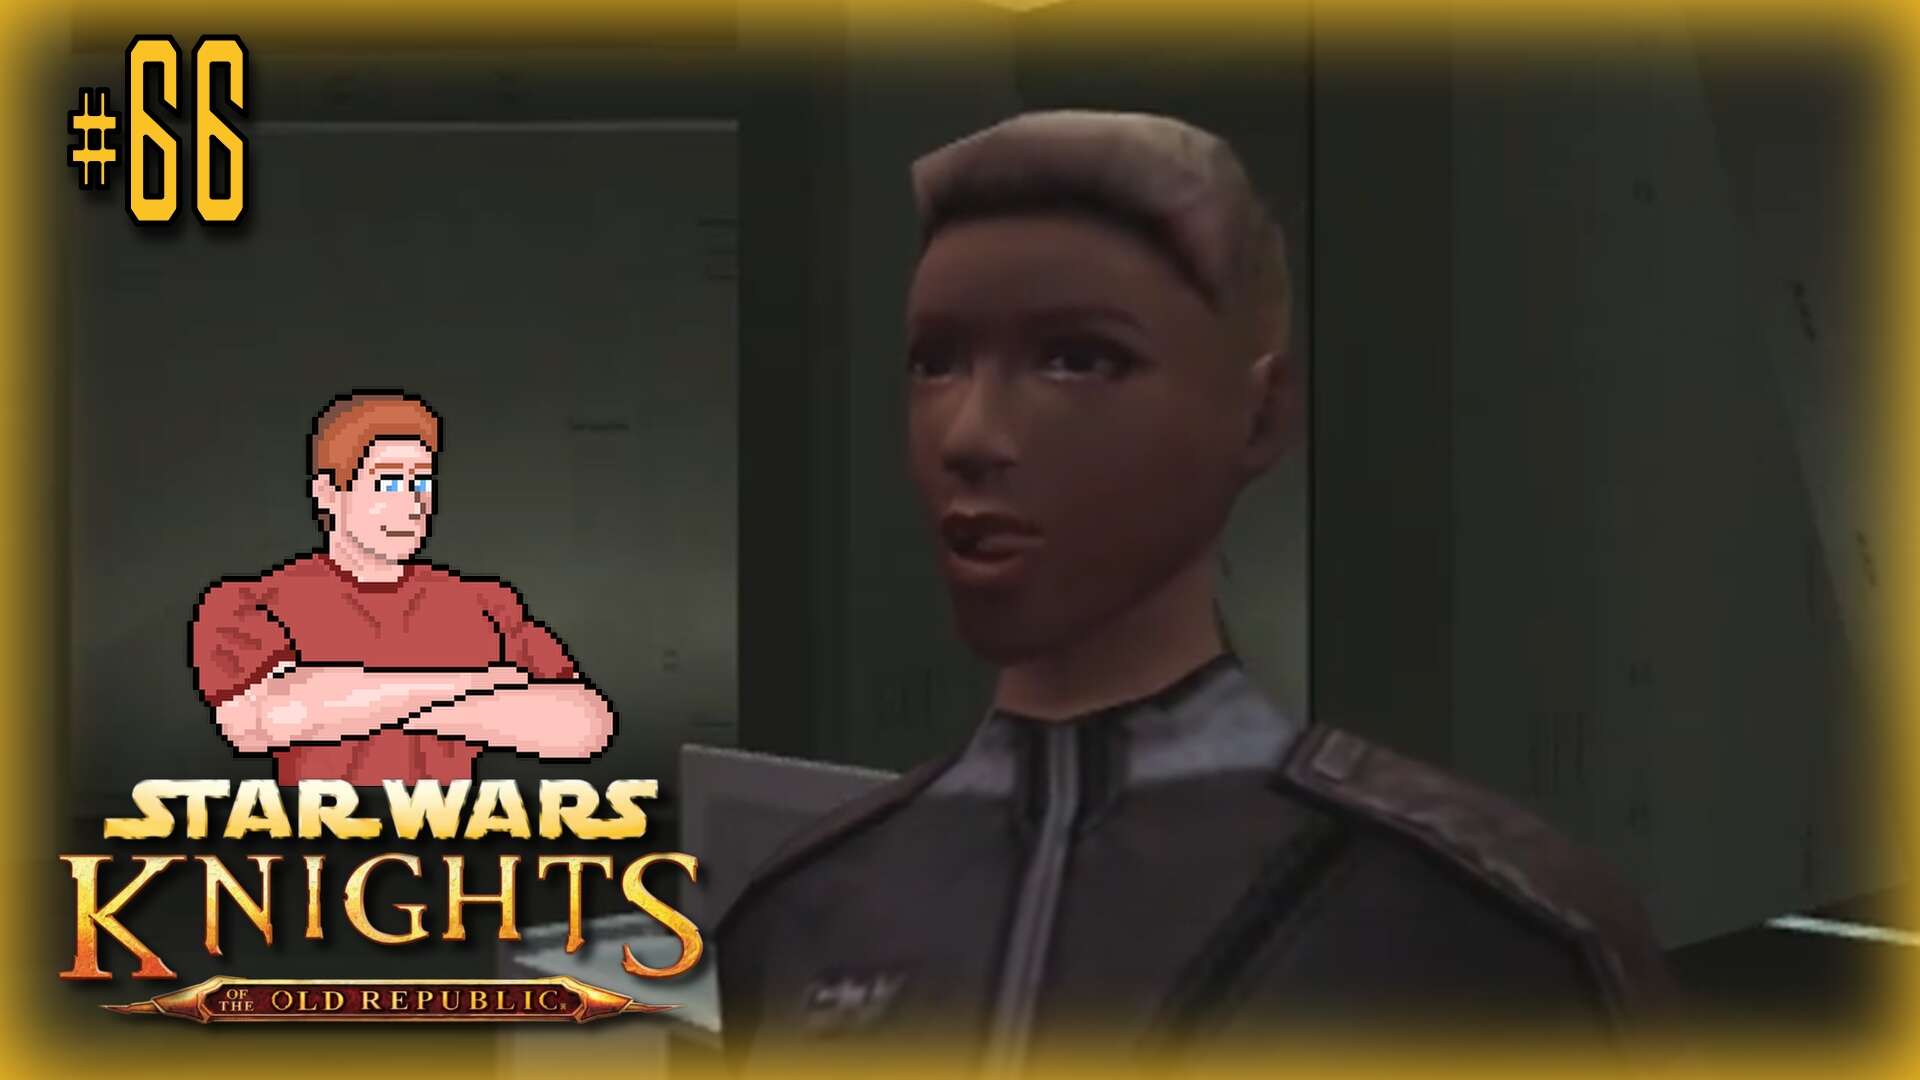 Star Wars: KOTOR (Sith Thugs) Let's Play! #66